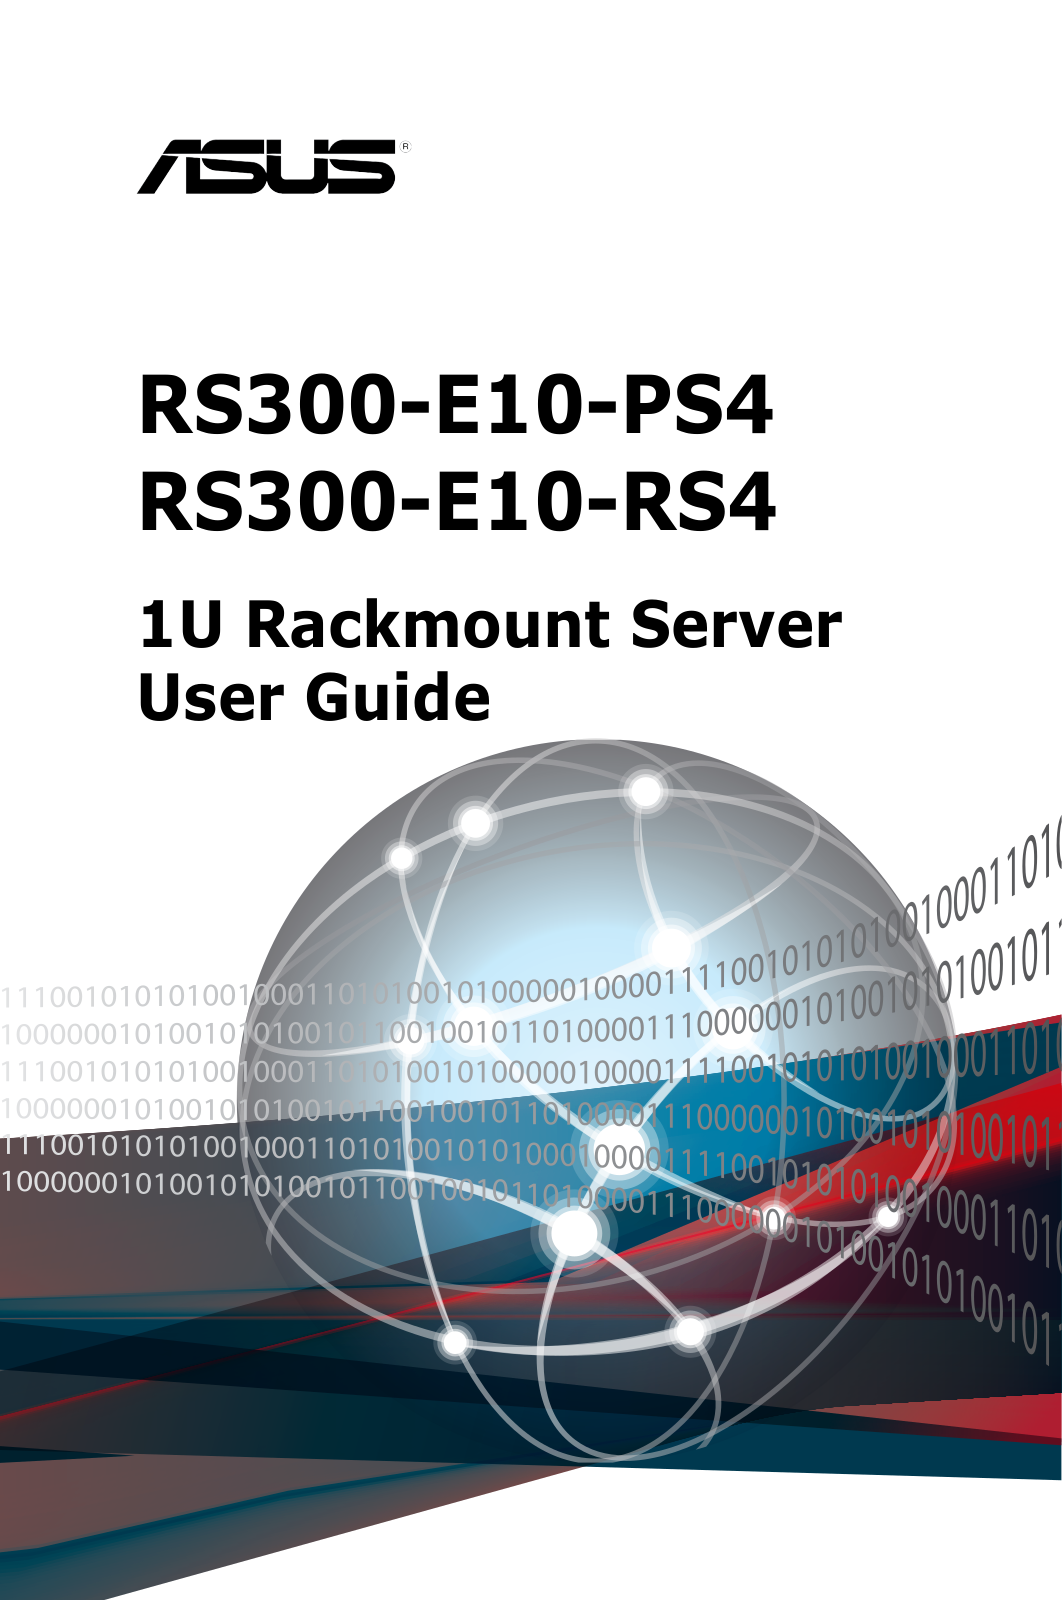 Asus RS300-E10-RS4, RS300-E10-PS4 User Manual